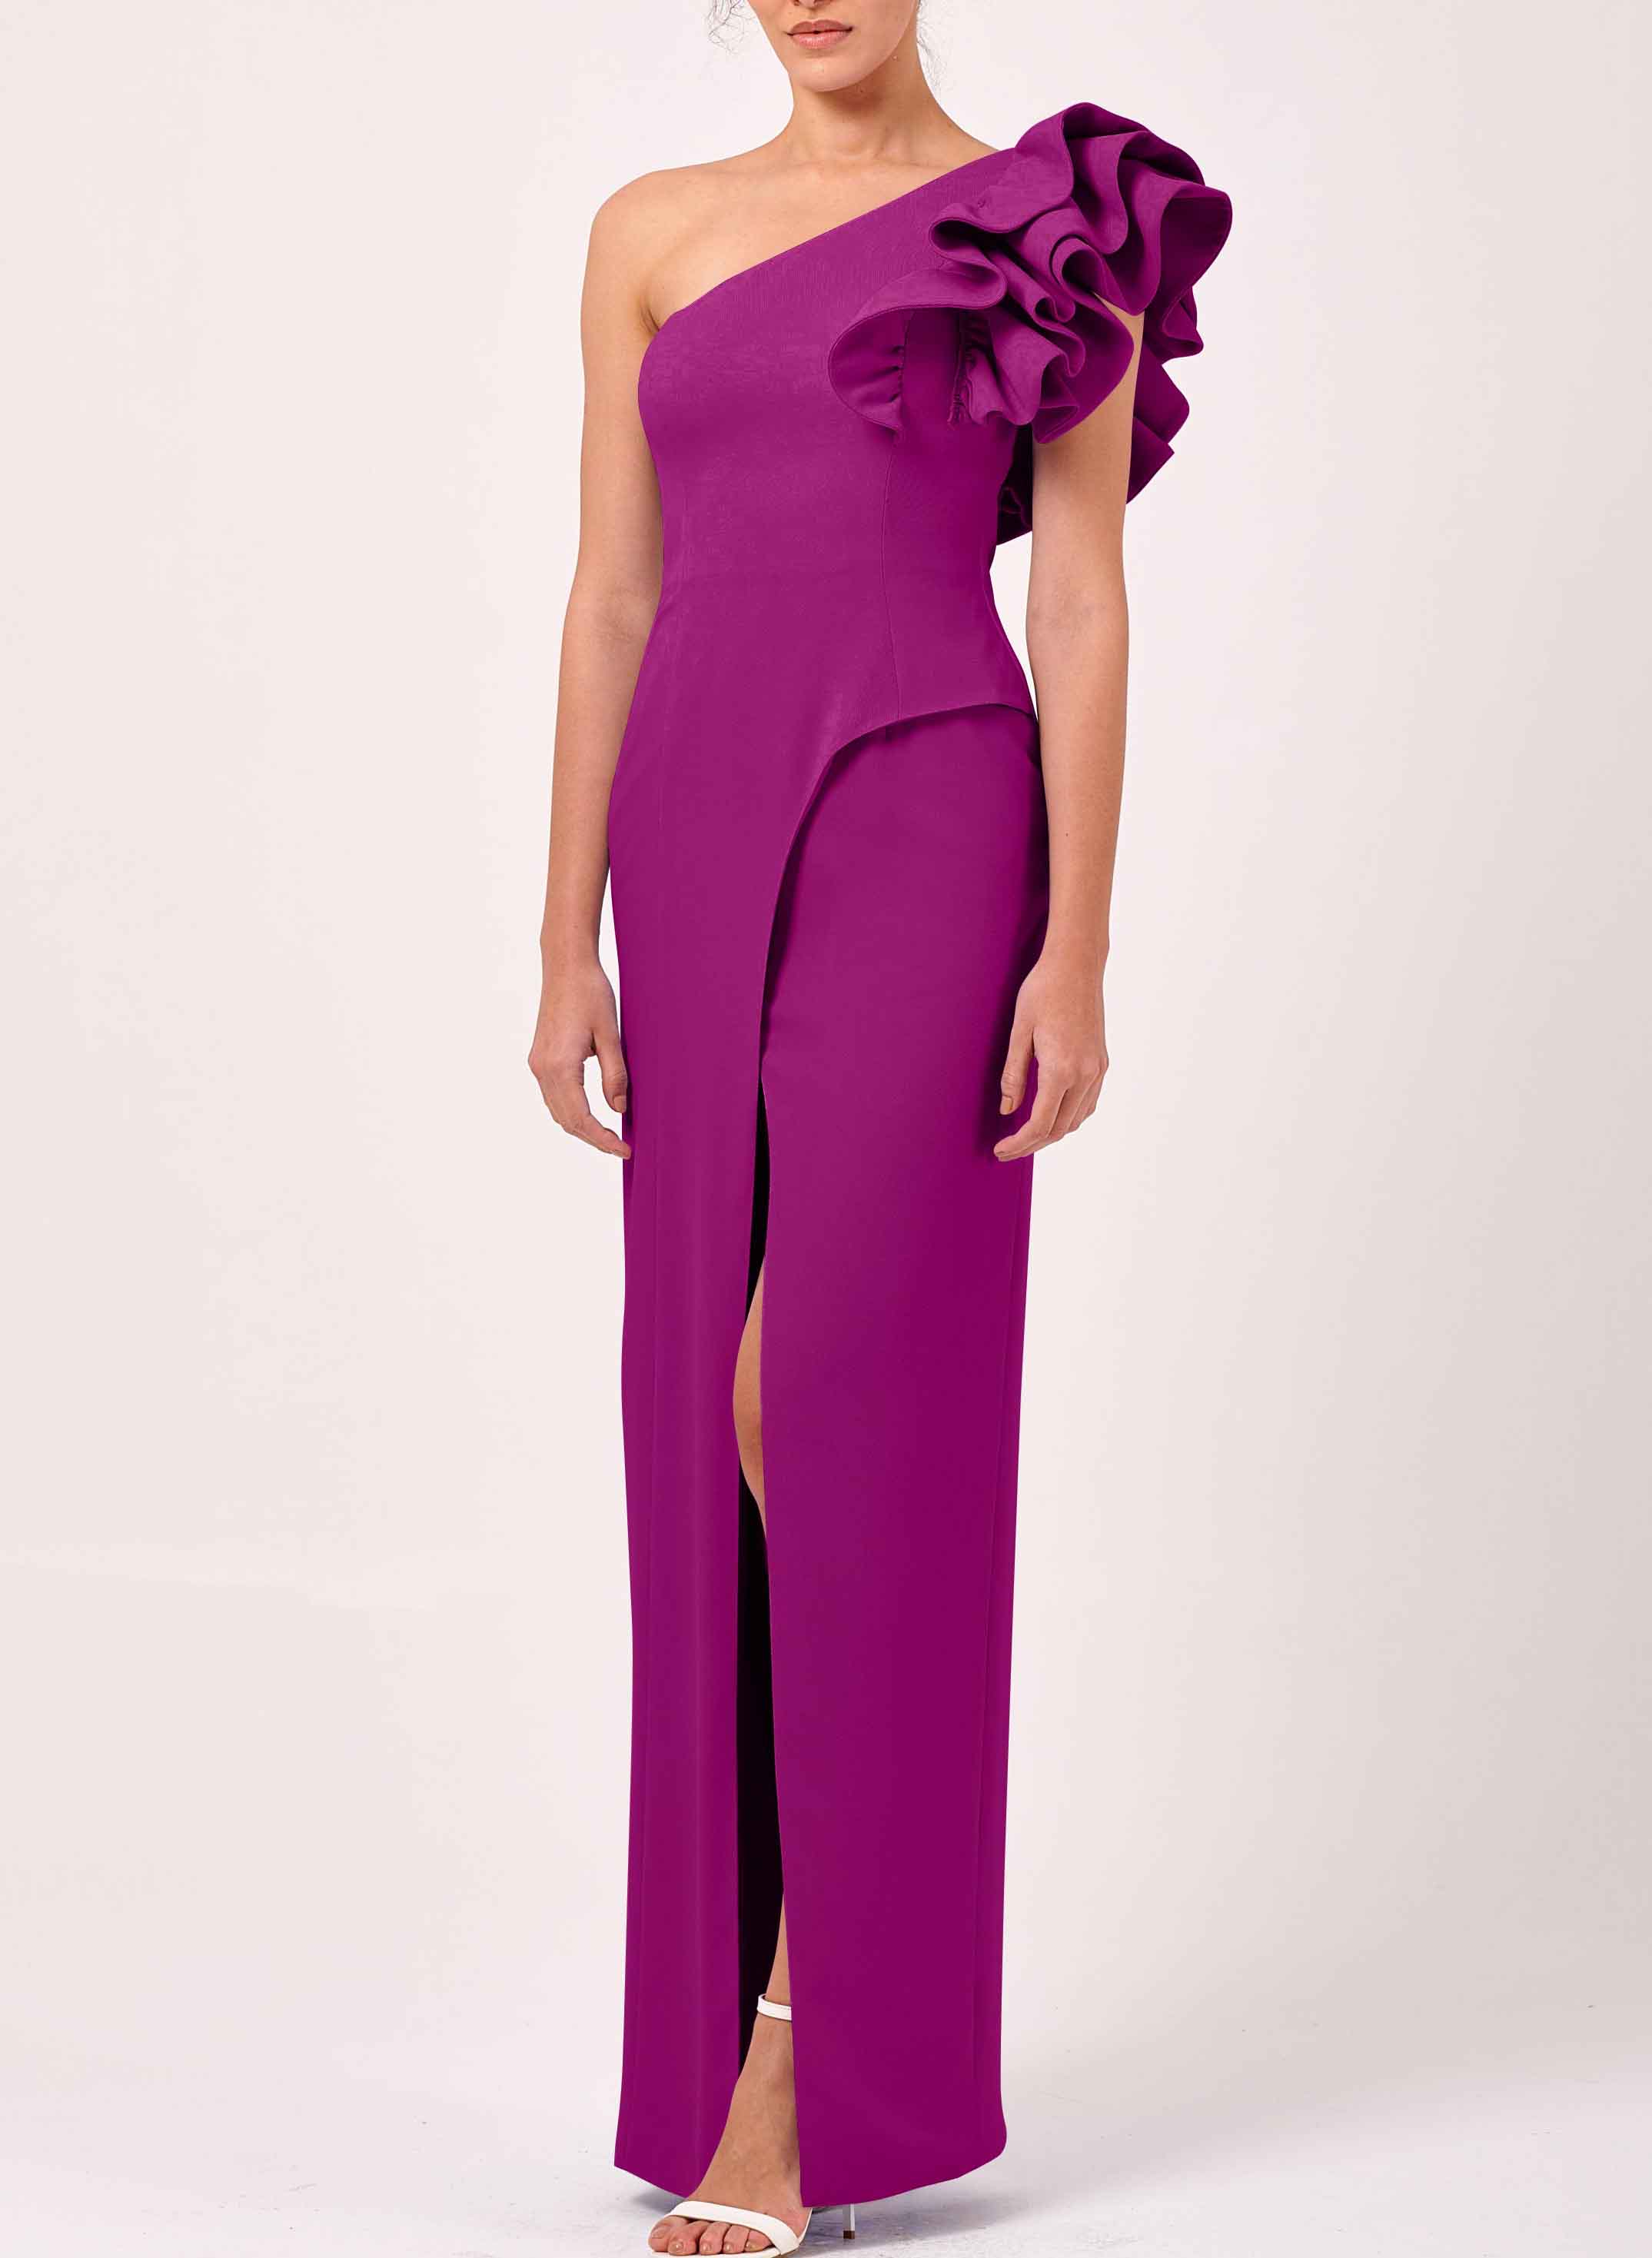 Elegant One-Shoulder Sheath/Column Mother Of The Bride Dresses With Cascading Ruffles